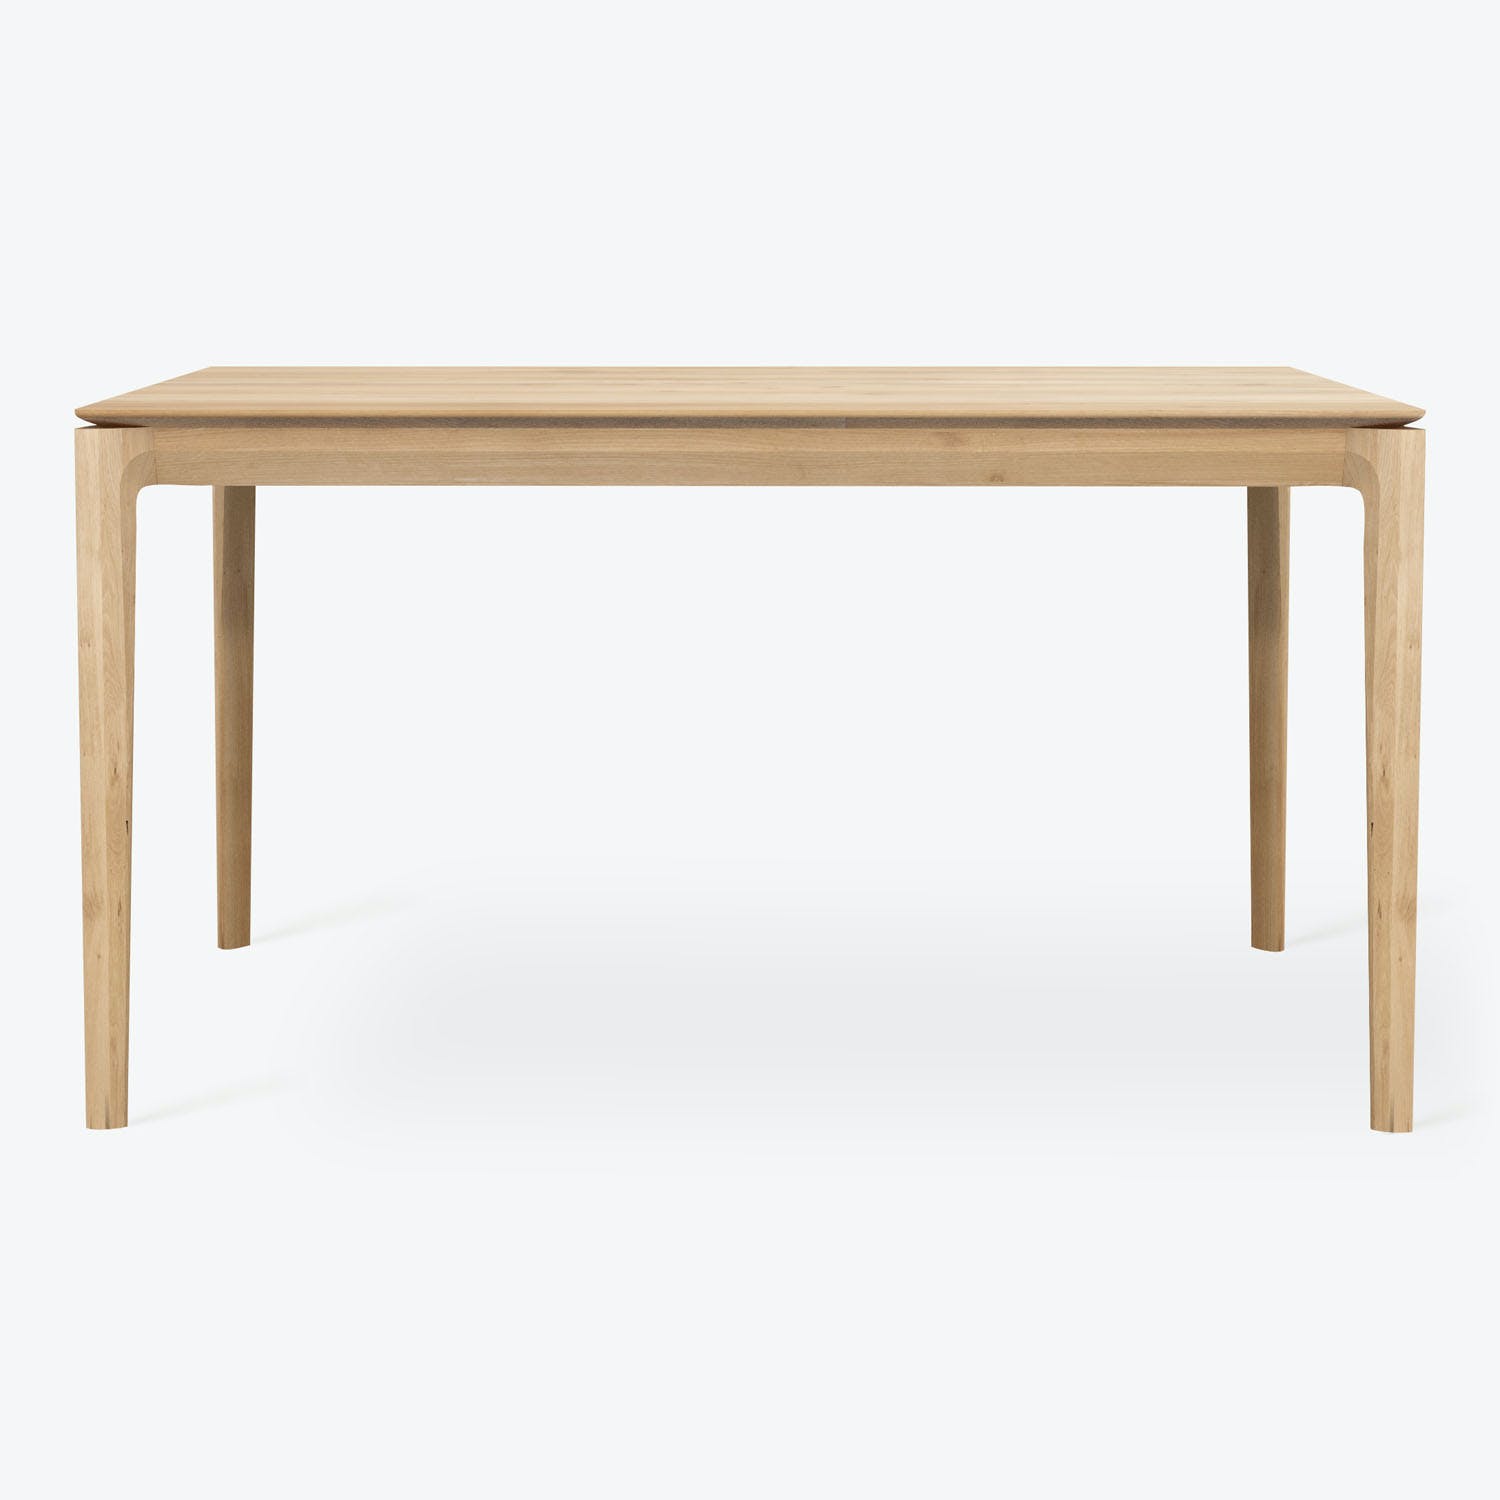 Minimalistic wooden table with clean lines and versatile design